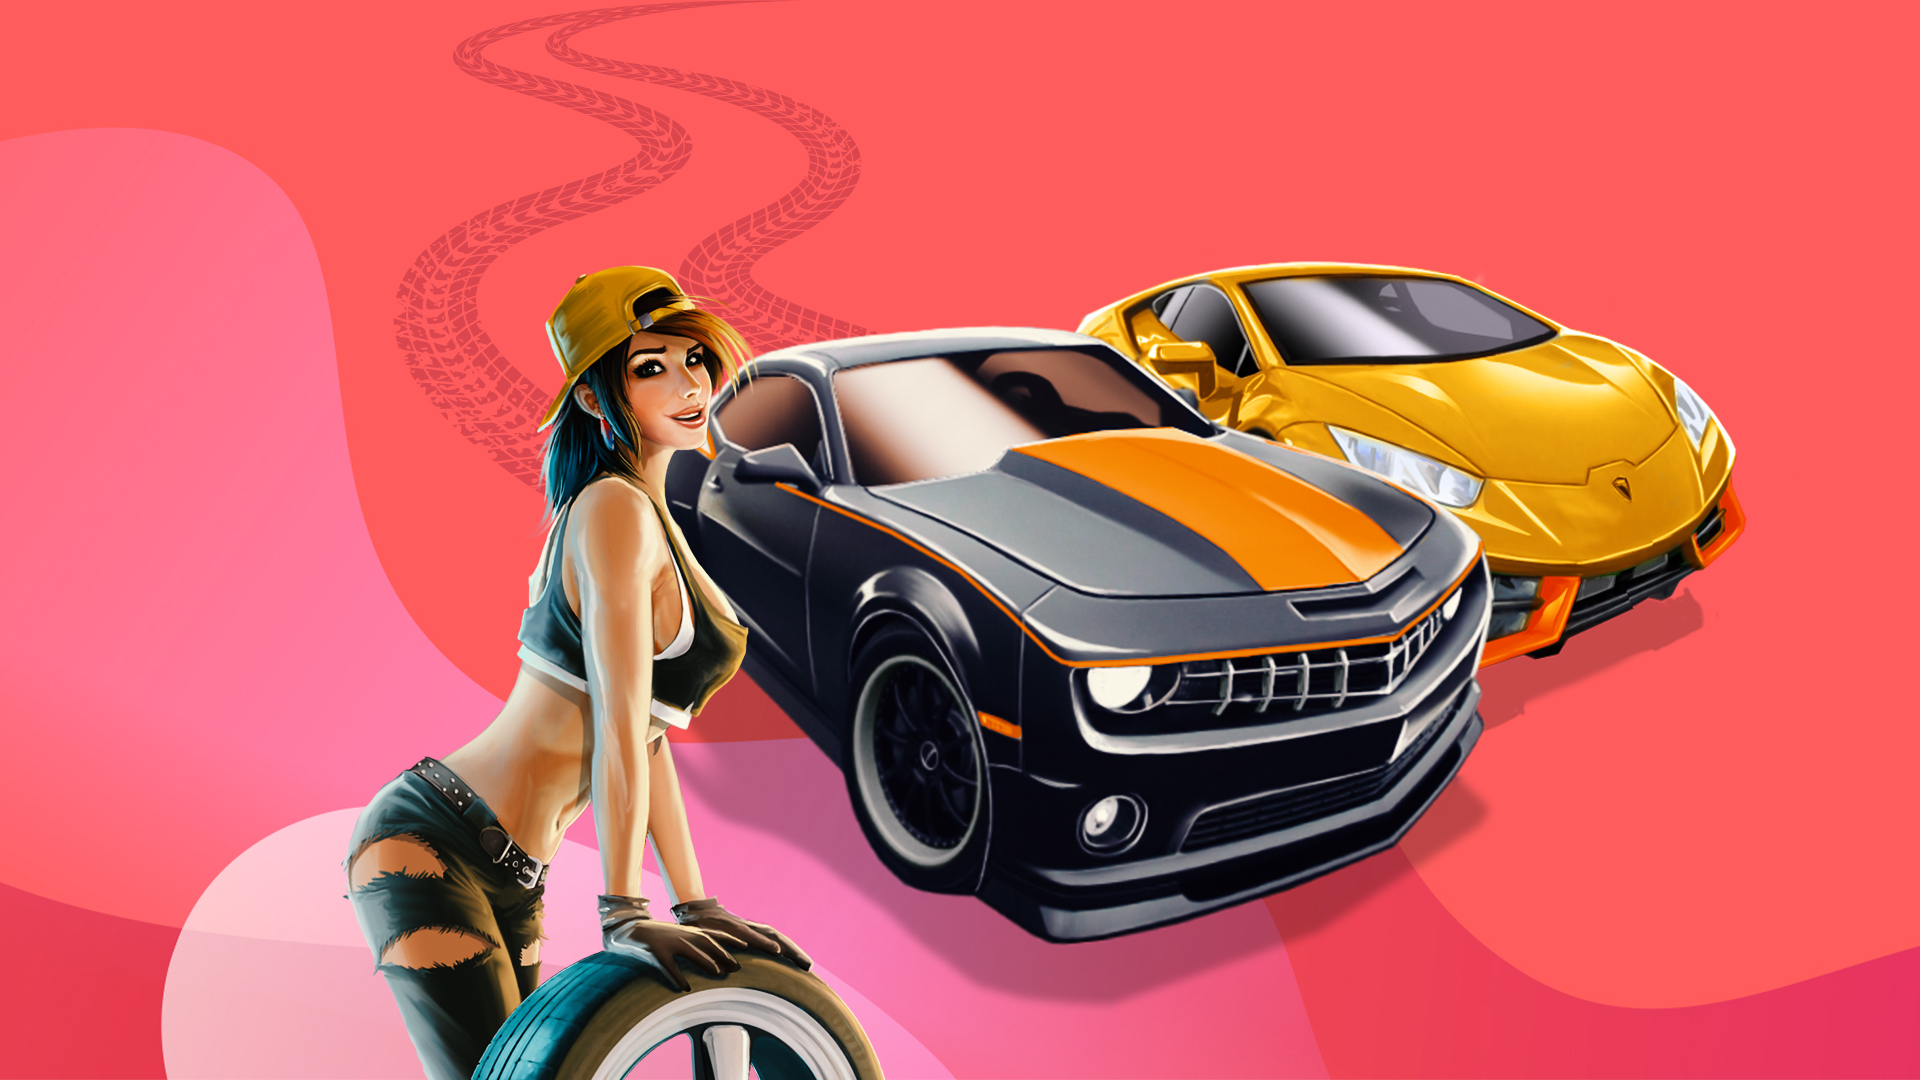 The main character from the SlotsLV slots game, Fast & Sexy, stands in front of two 3D race cars.